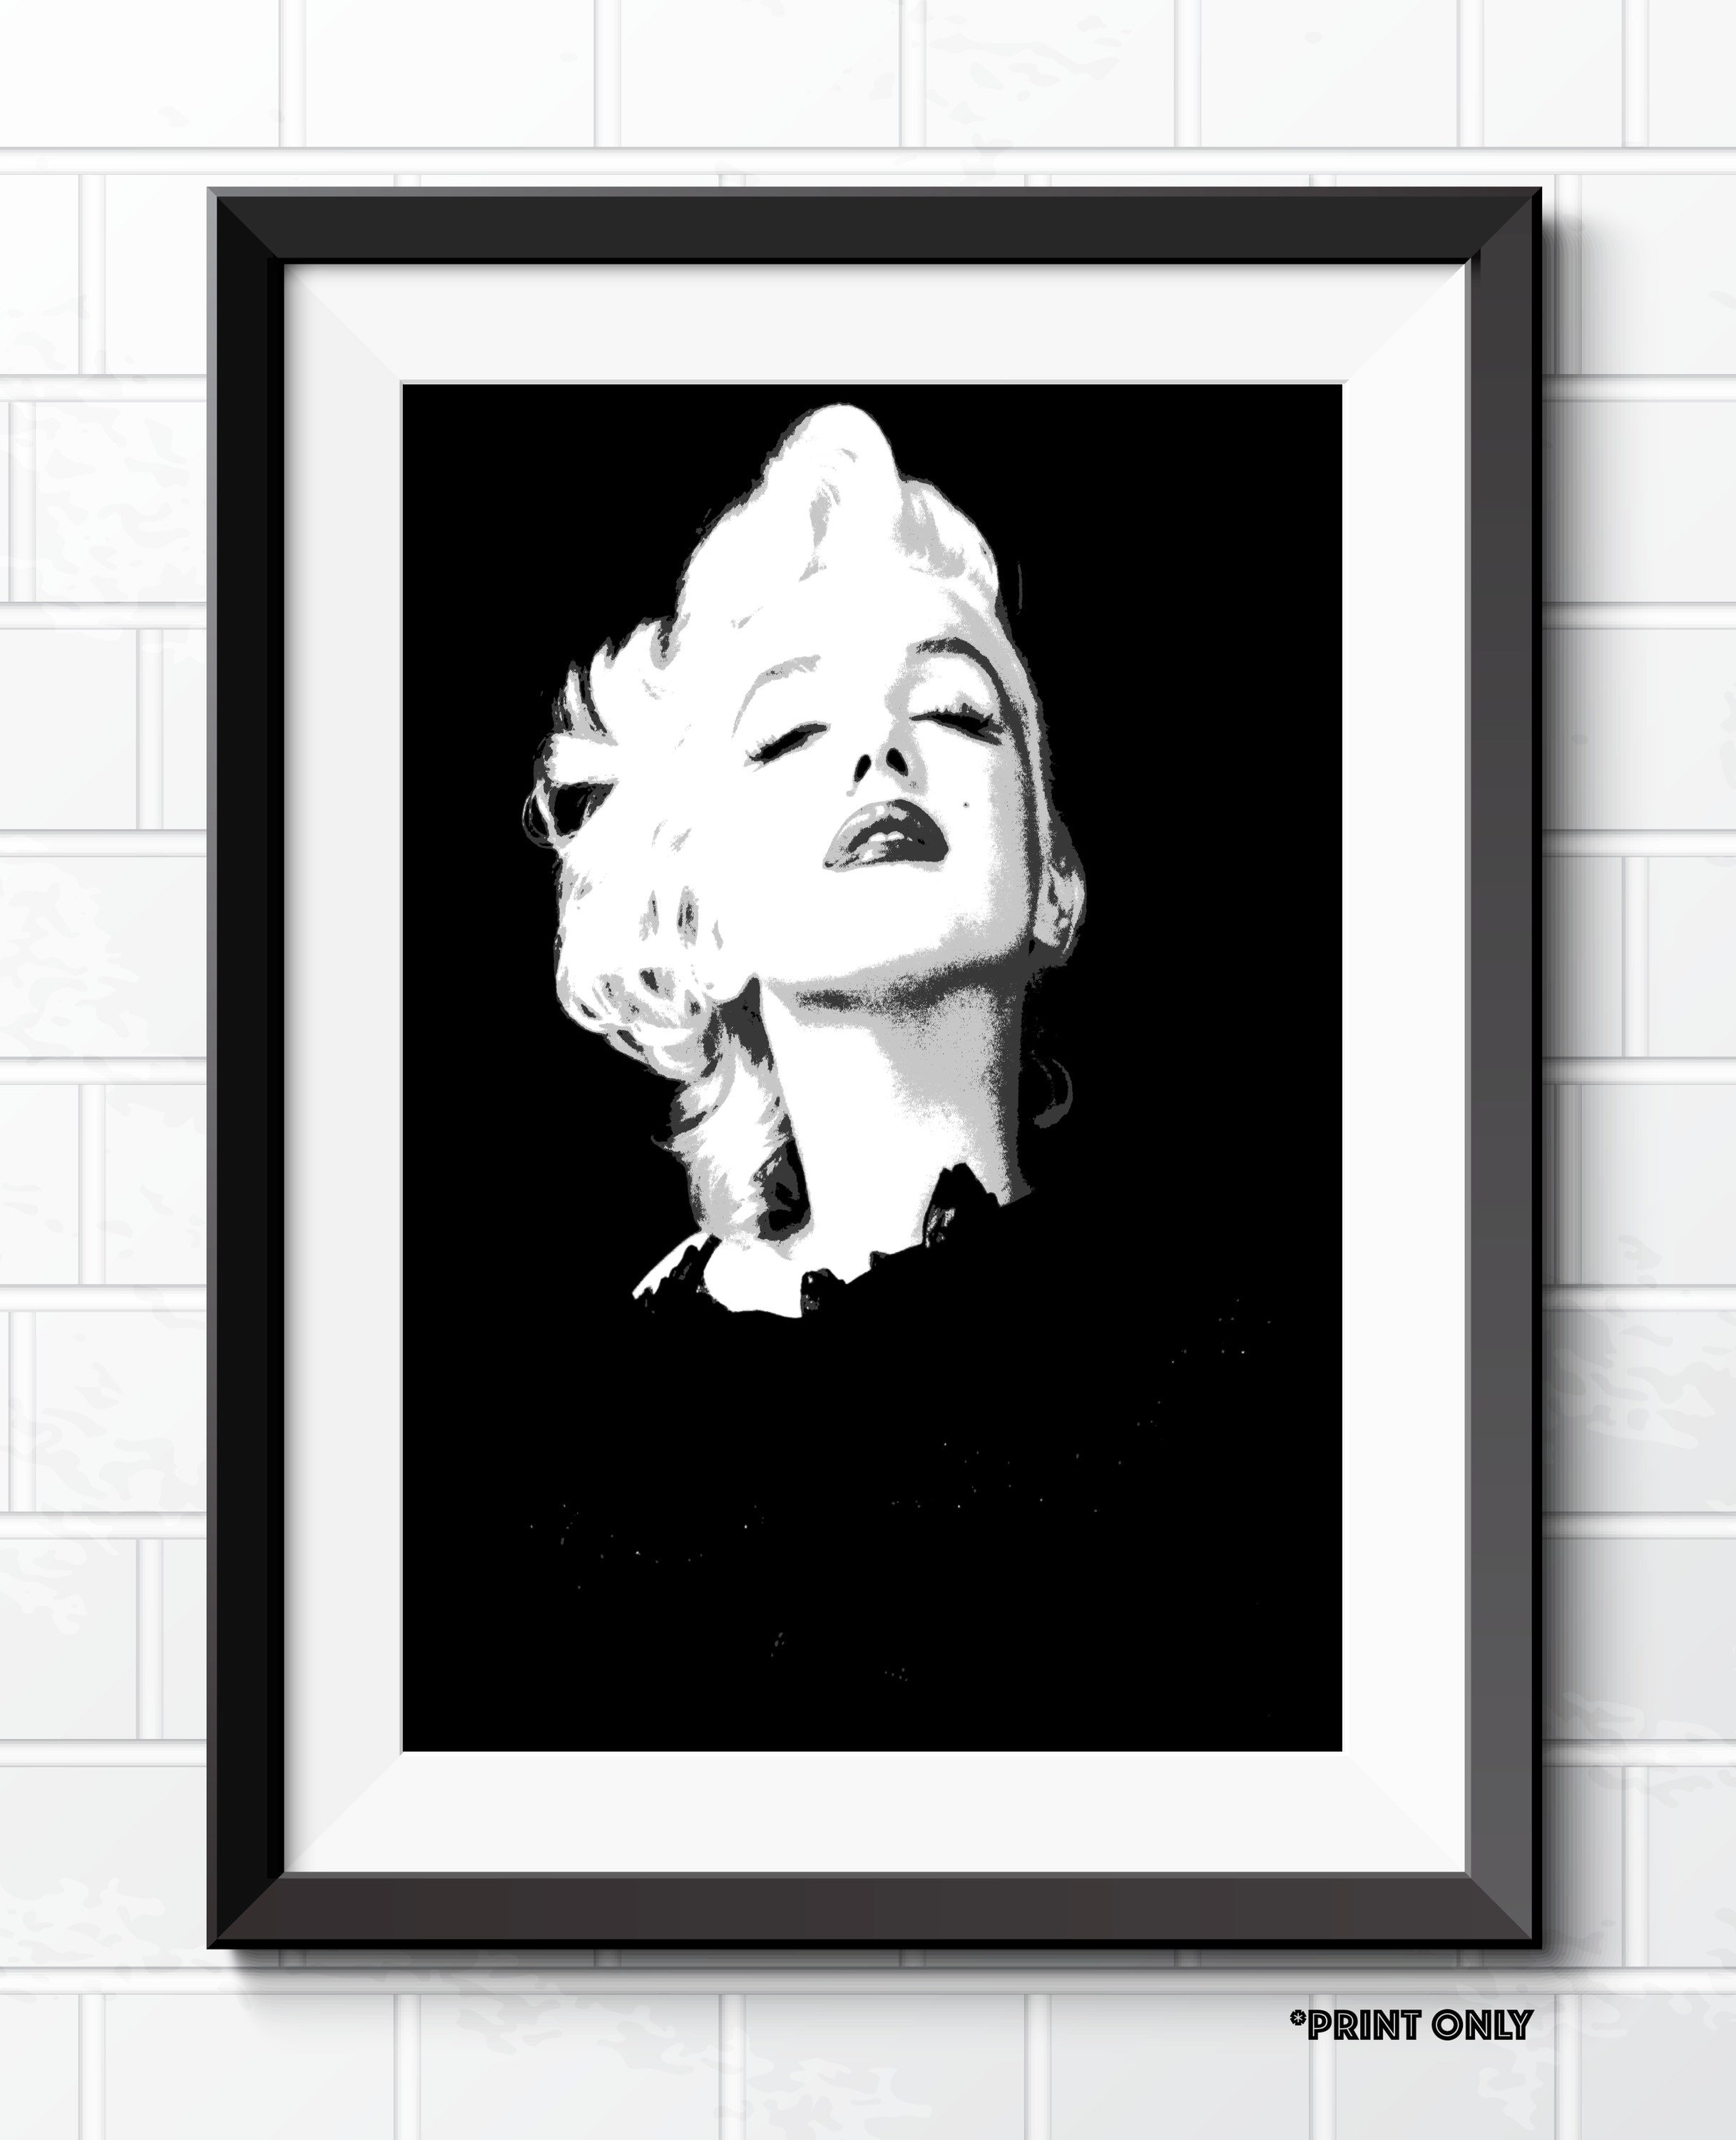 Marilyn Monroe in her famous white dress art Photo print A4 or A5 size 